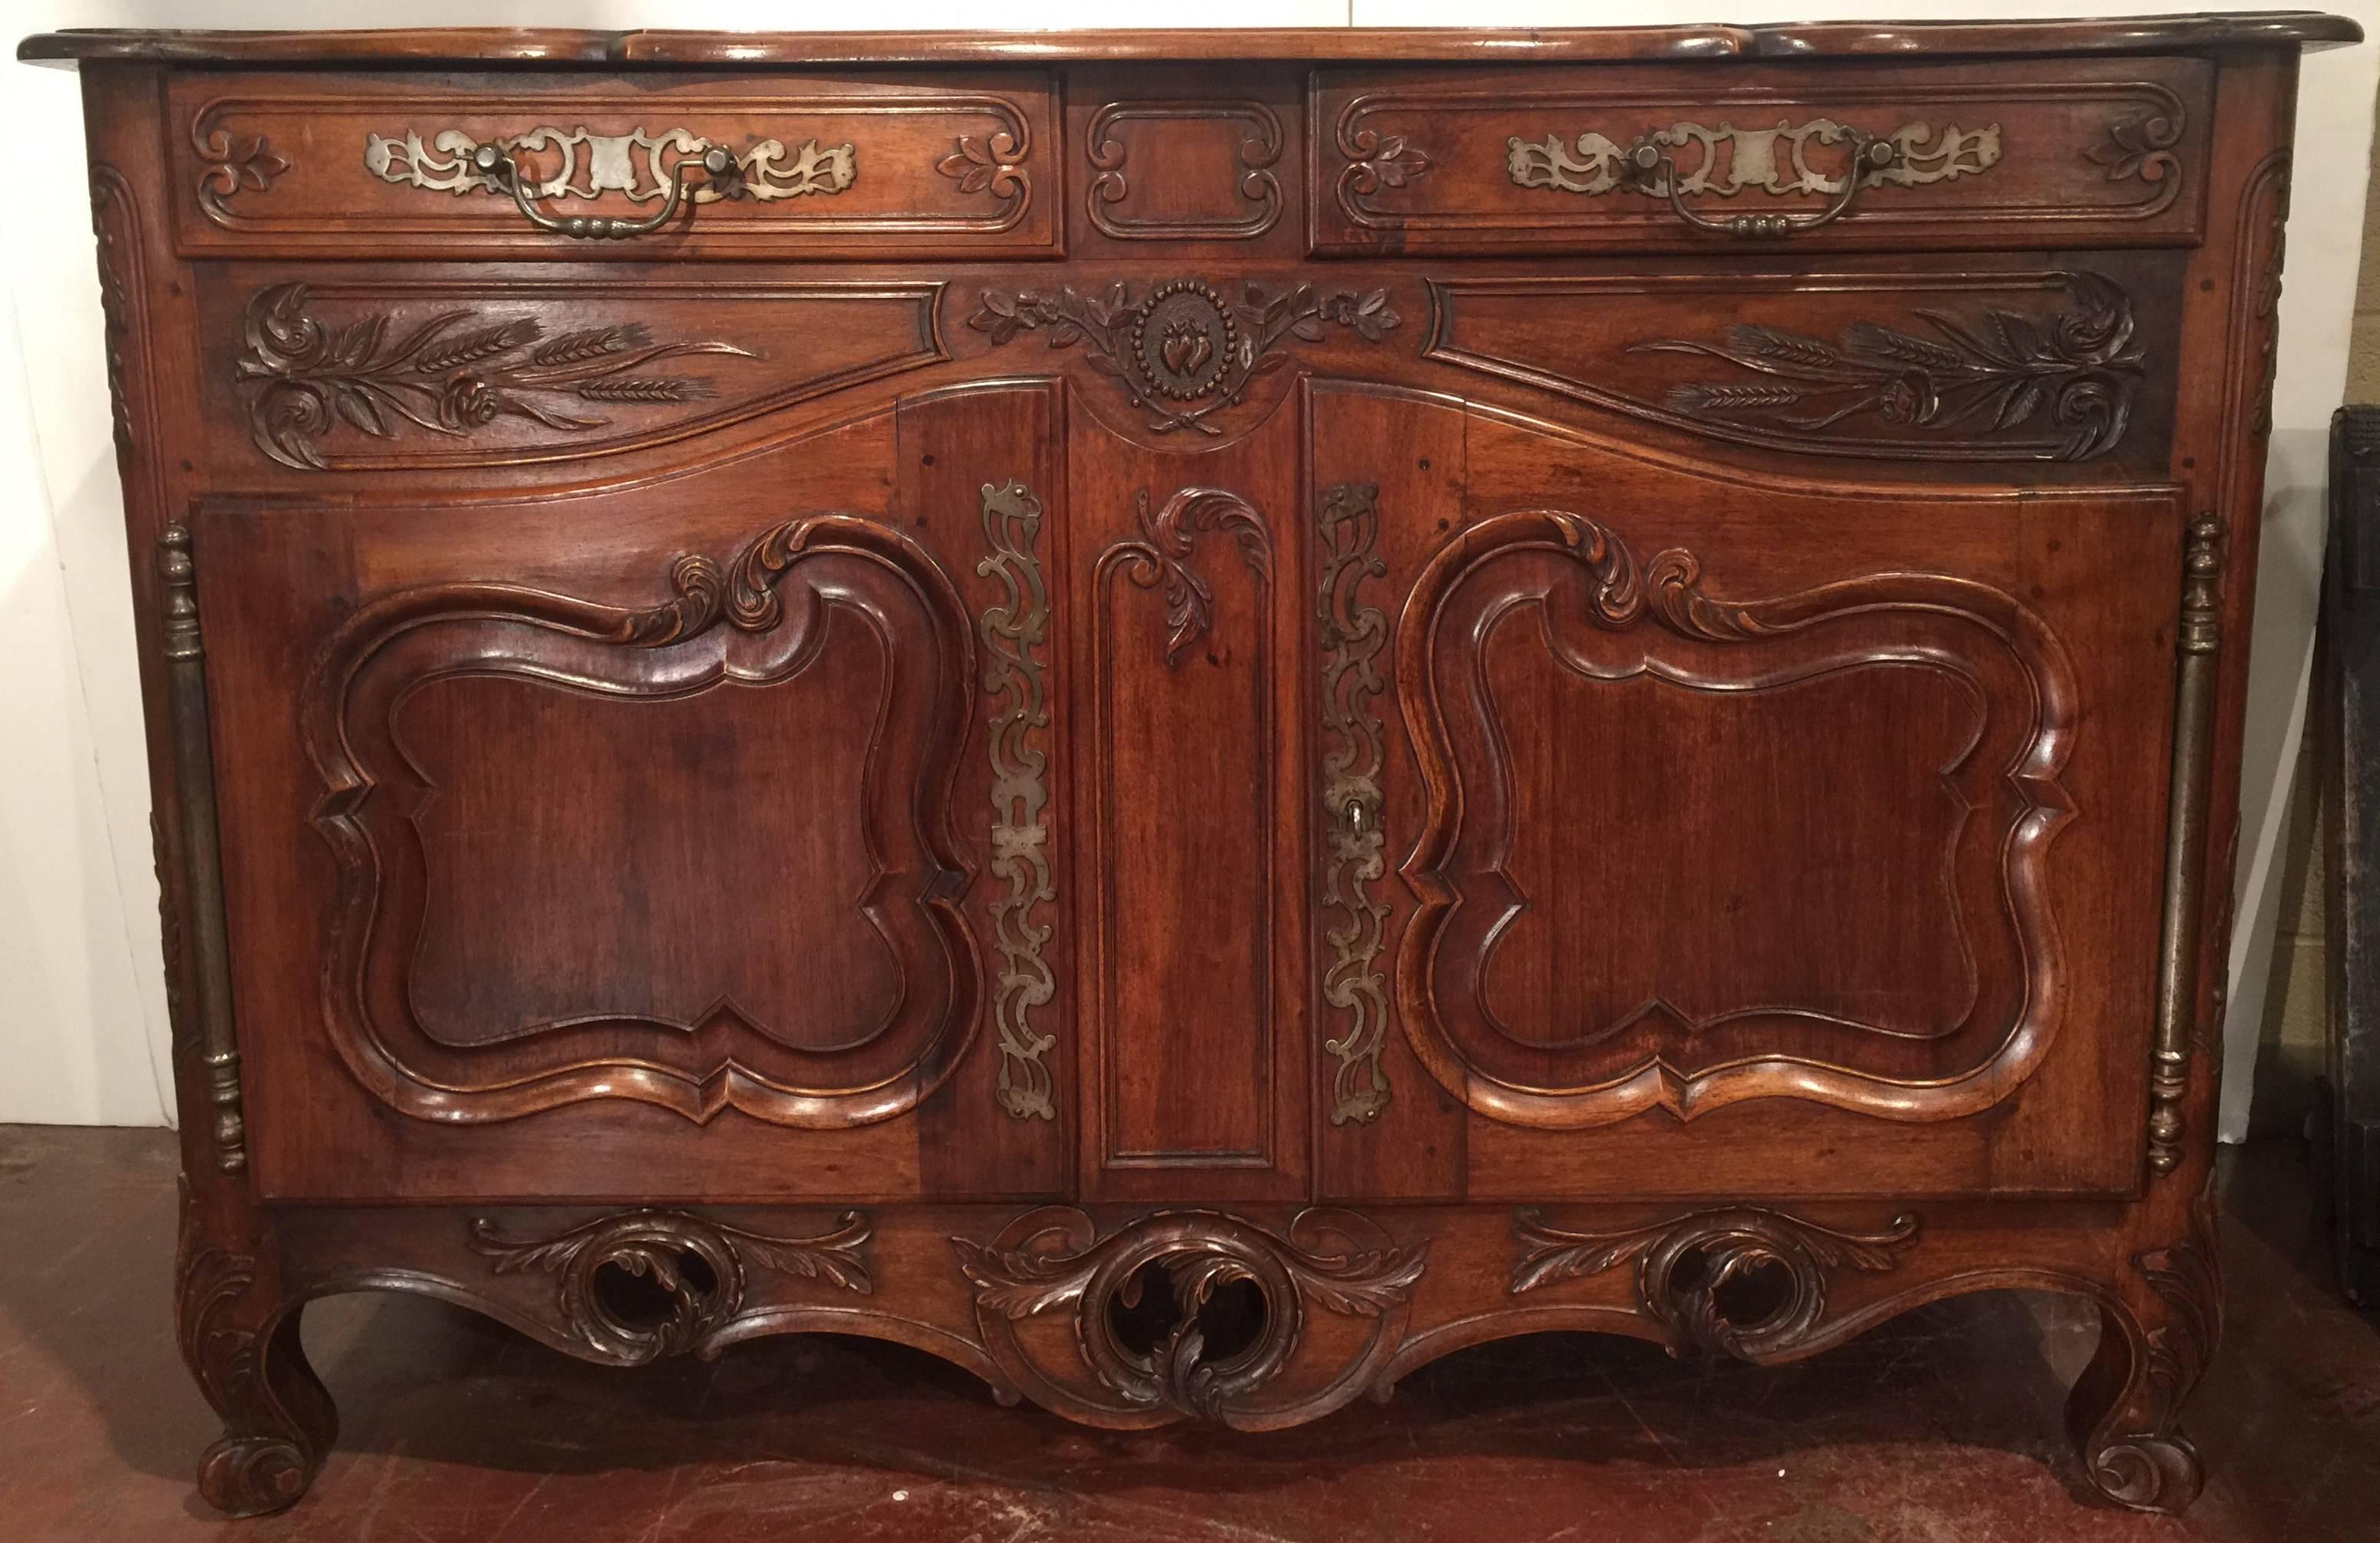 Elegant antique Louis XV fruit wood buffet from Provence, France, circa 1880. Beautifully carved with heavy hardware, this cabinet features 2 upper drawers and double doors underneath for storage.
